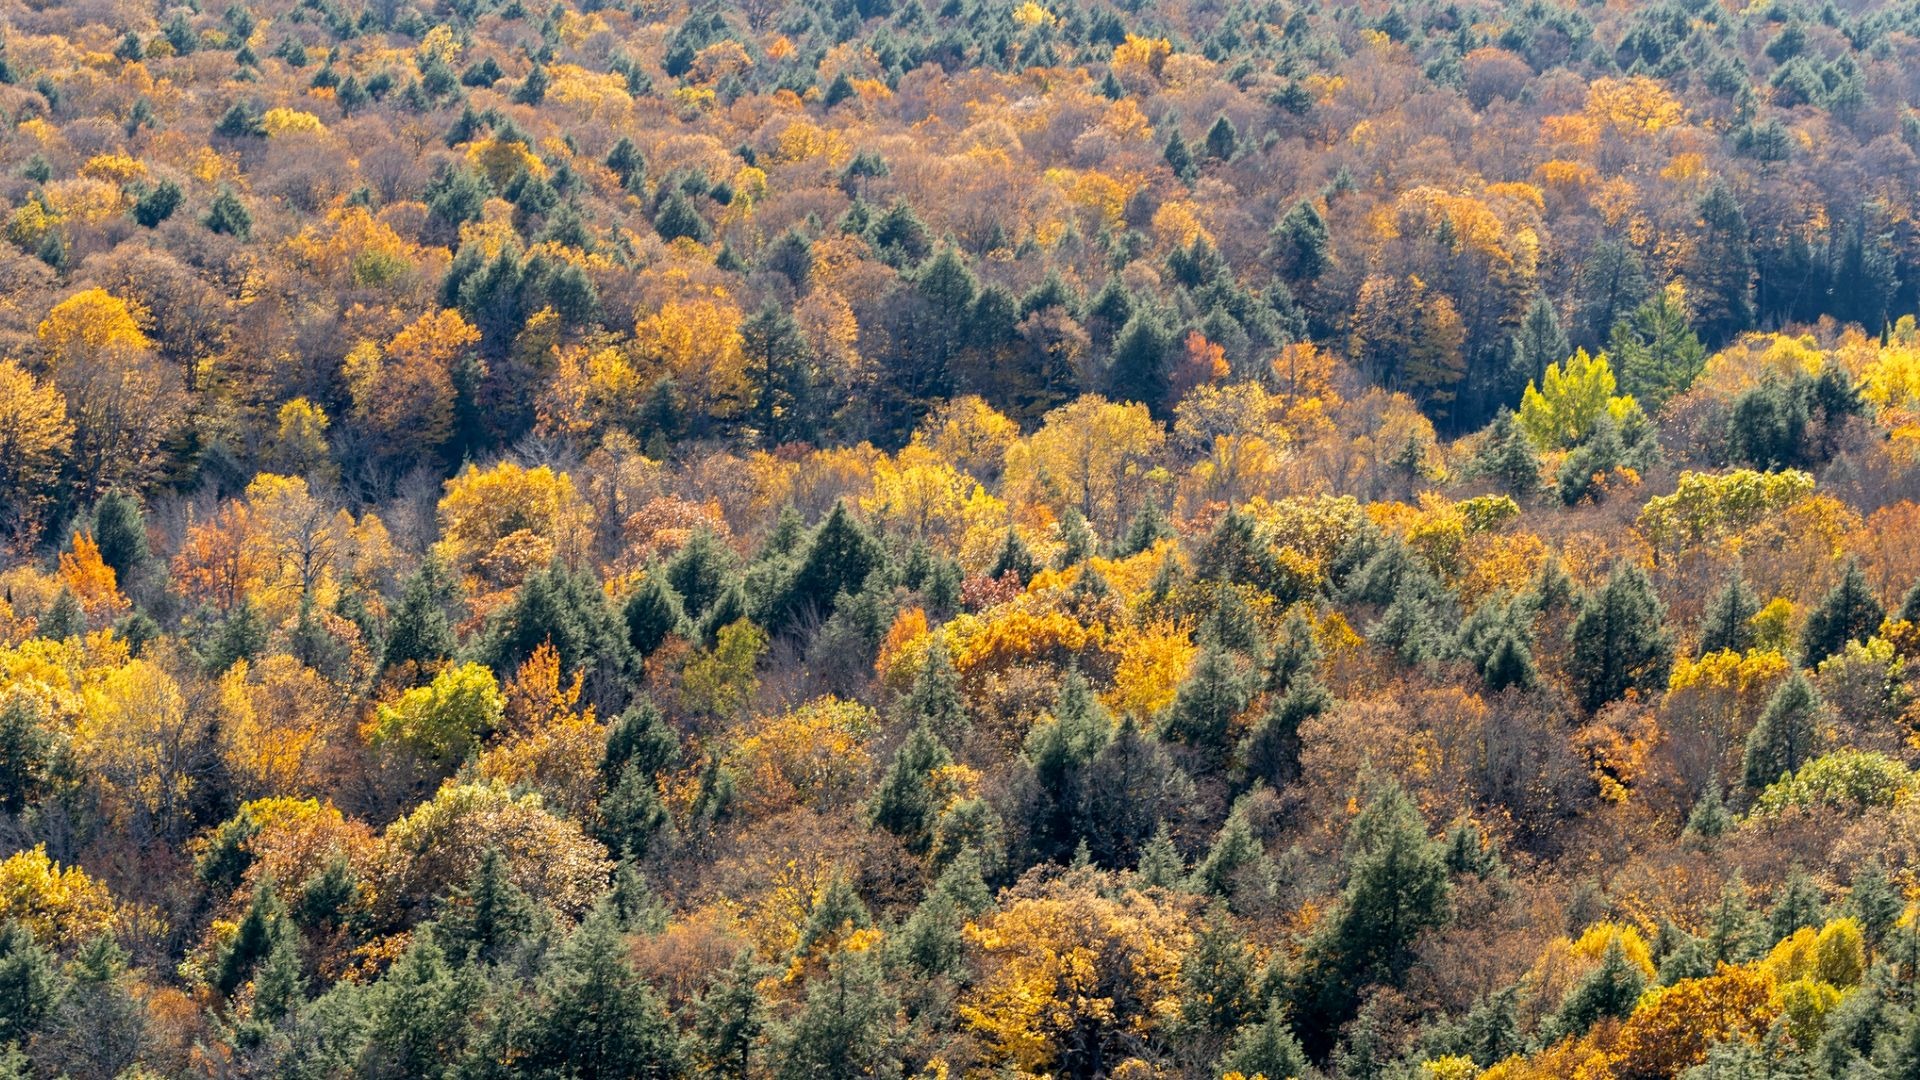 The Science of Autumn - Creating Tomorrow's Forests  Restoring  biodiversity by creating habitats and planting trees